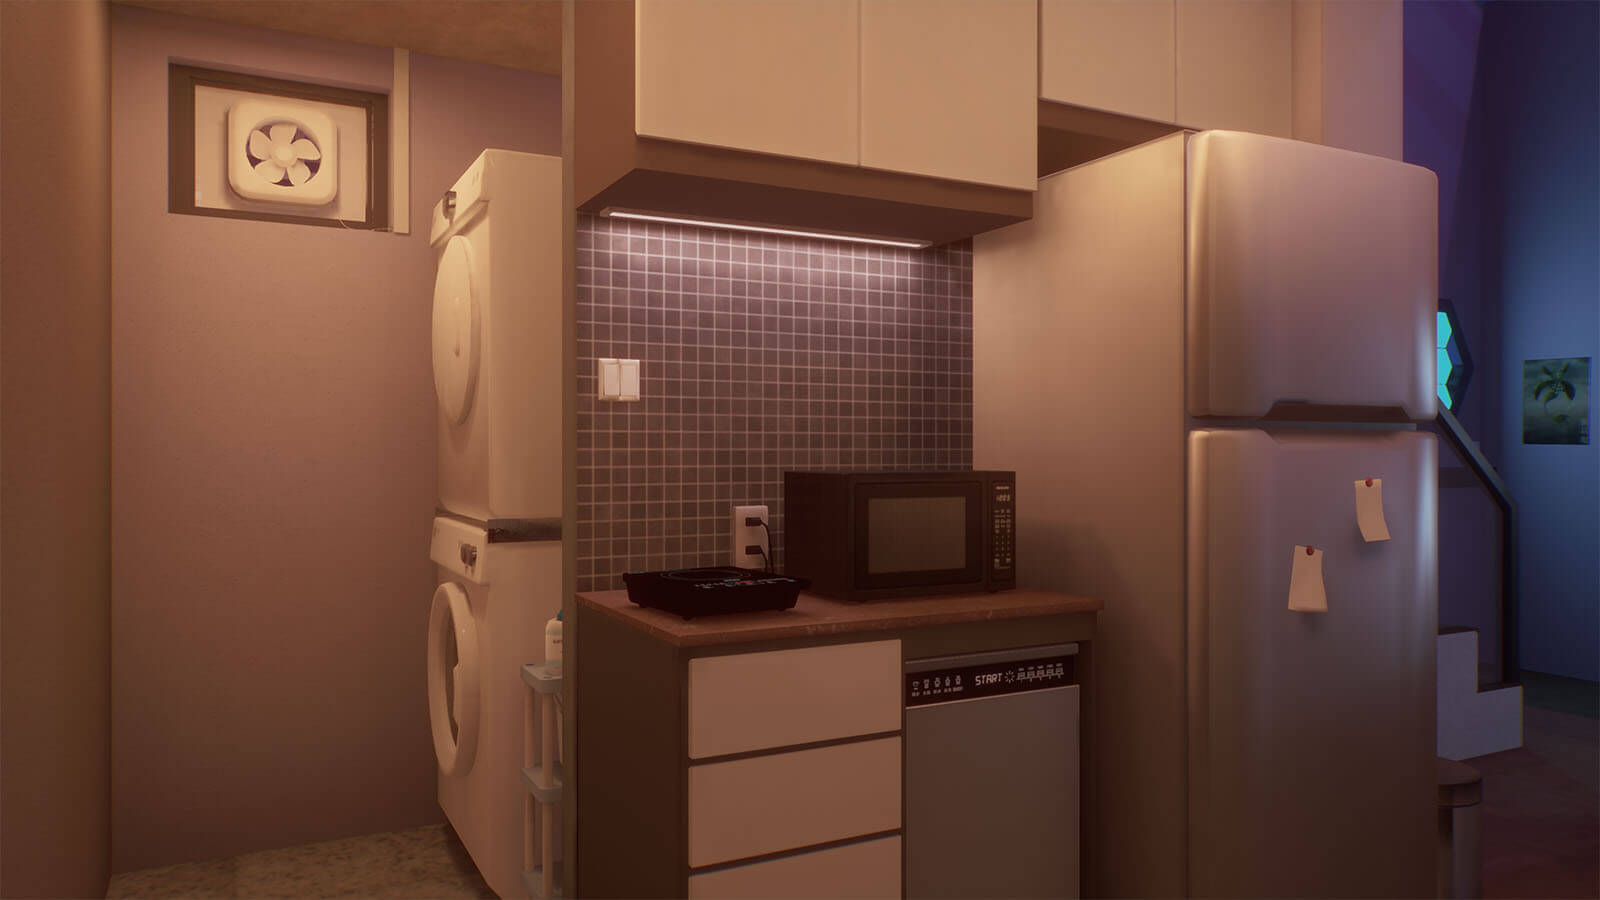 3D rendered view of a small kitchen and nearby washer and dryer